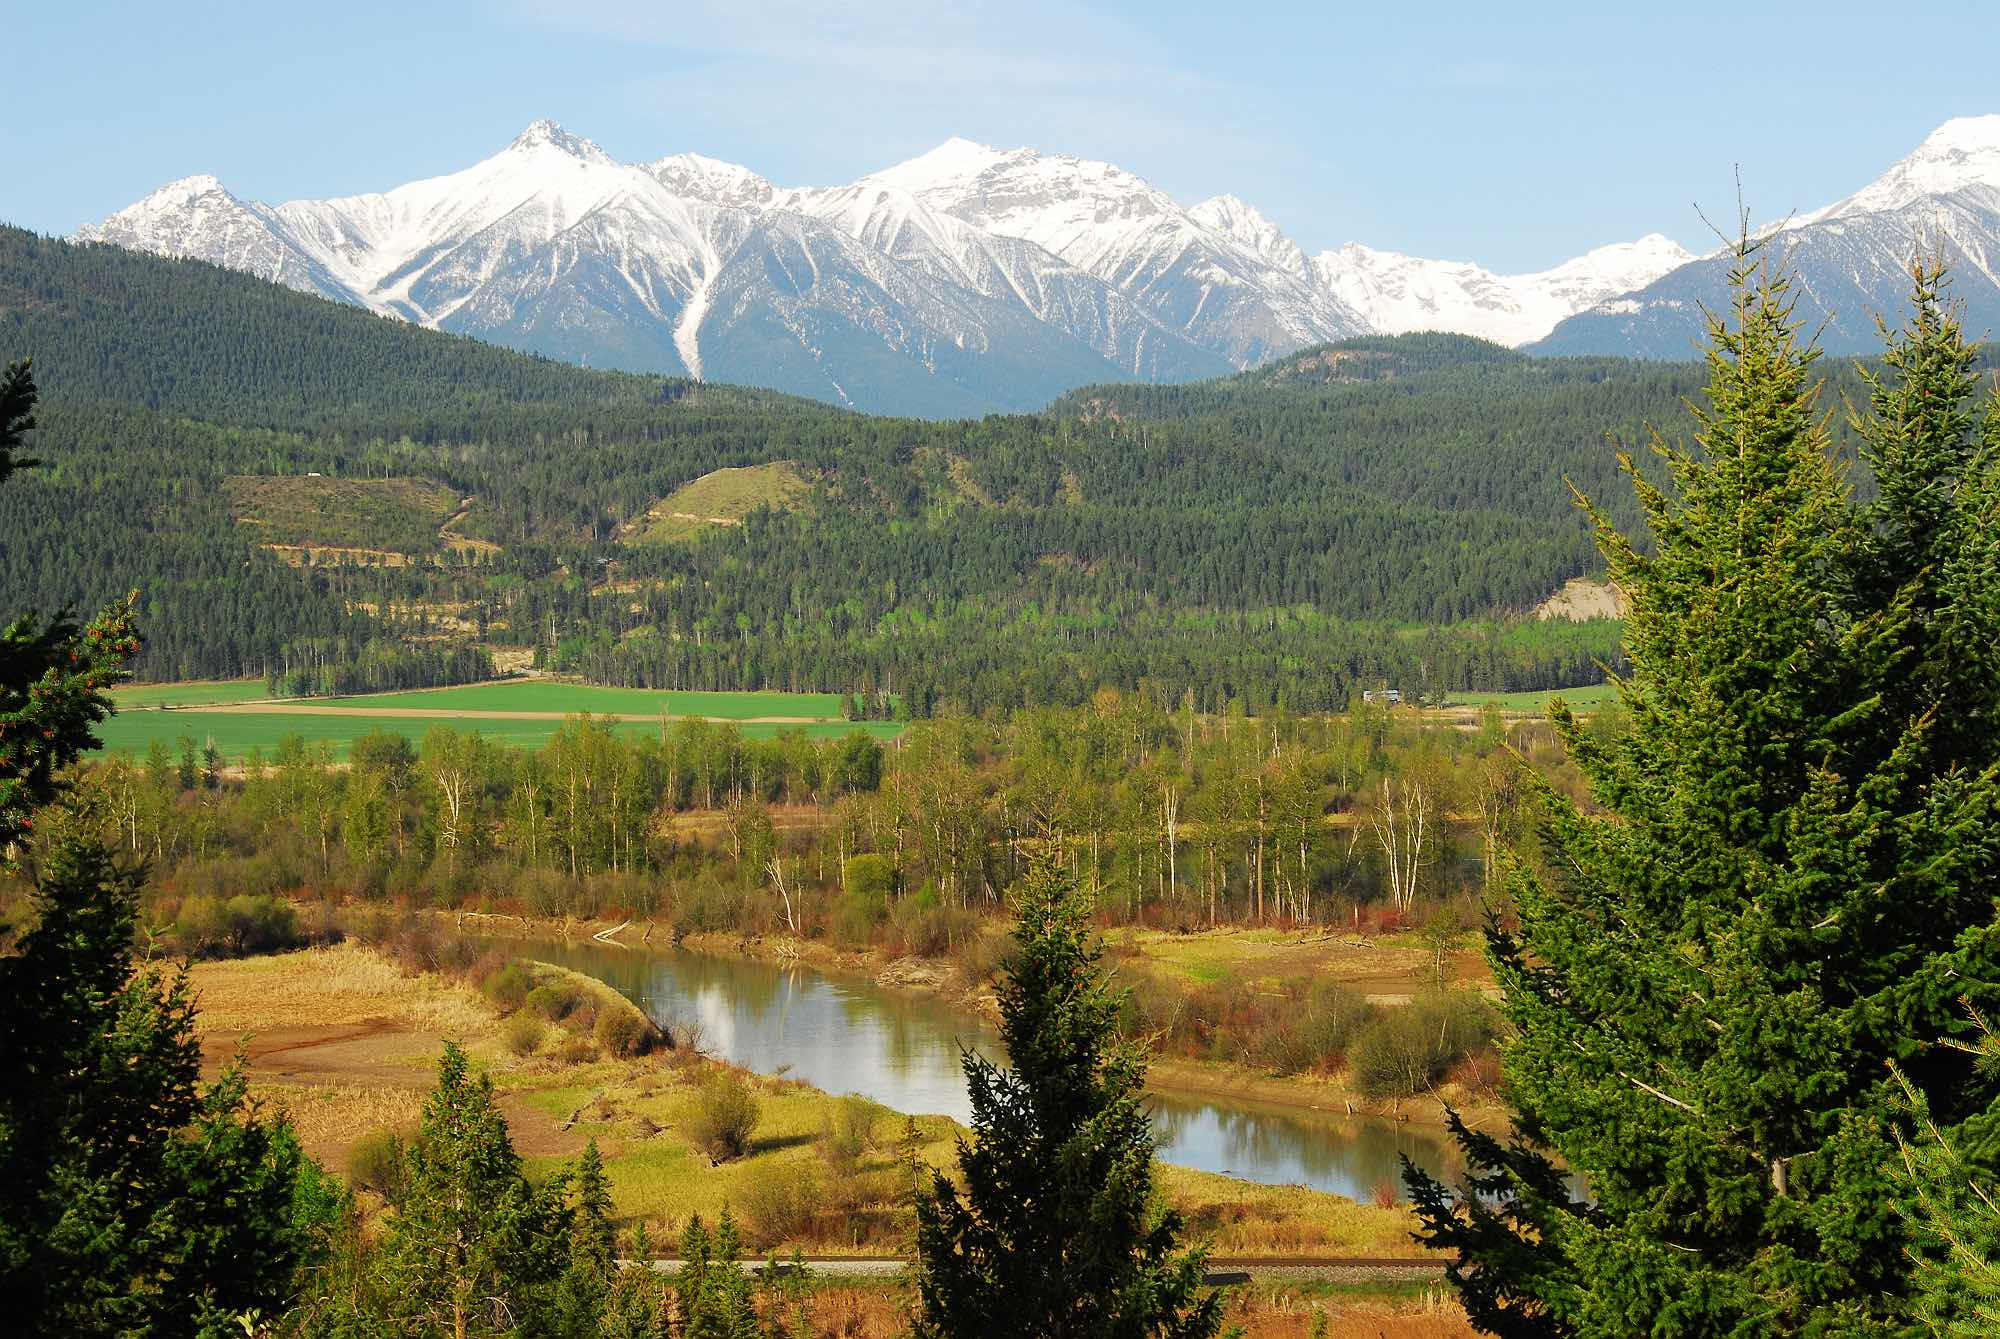 Invermere real estate listings: RV lots for sale in Invermere British Columbia